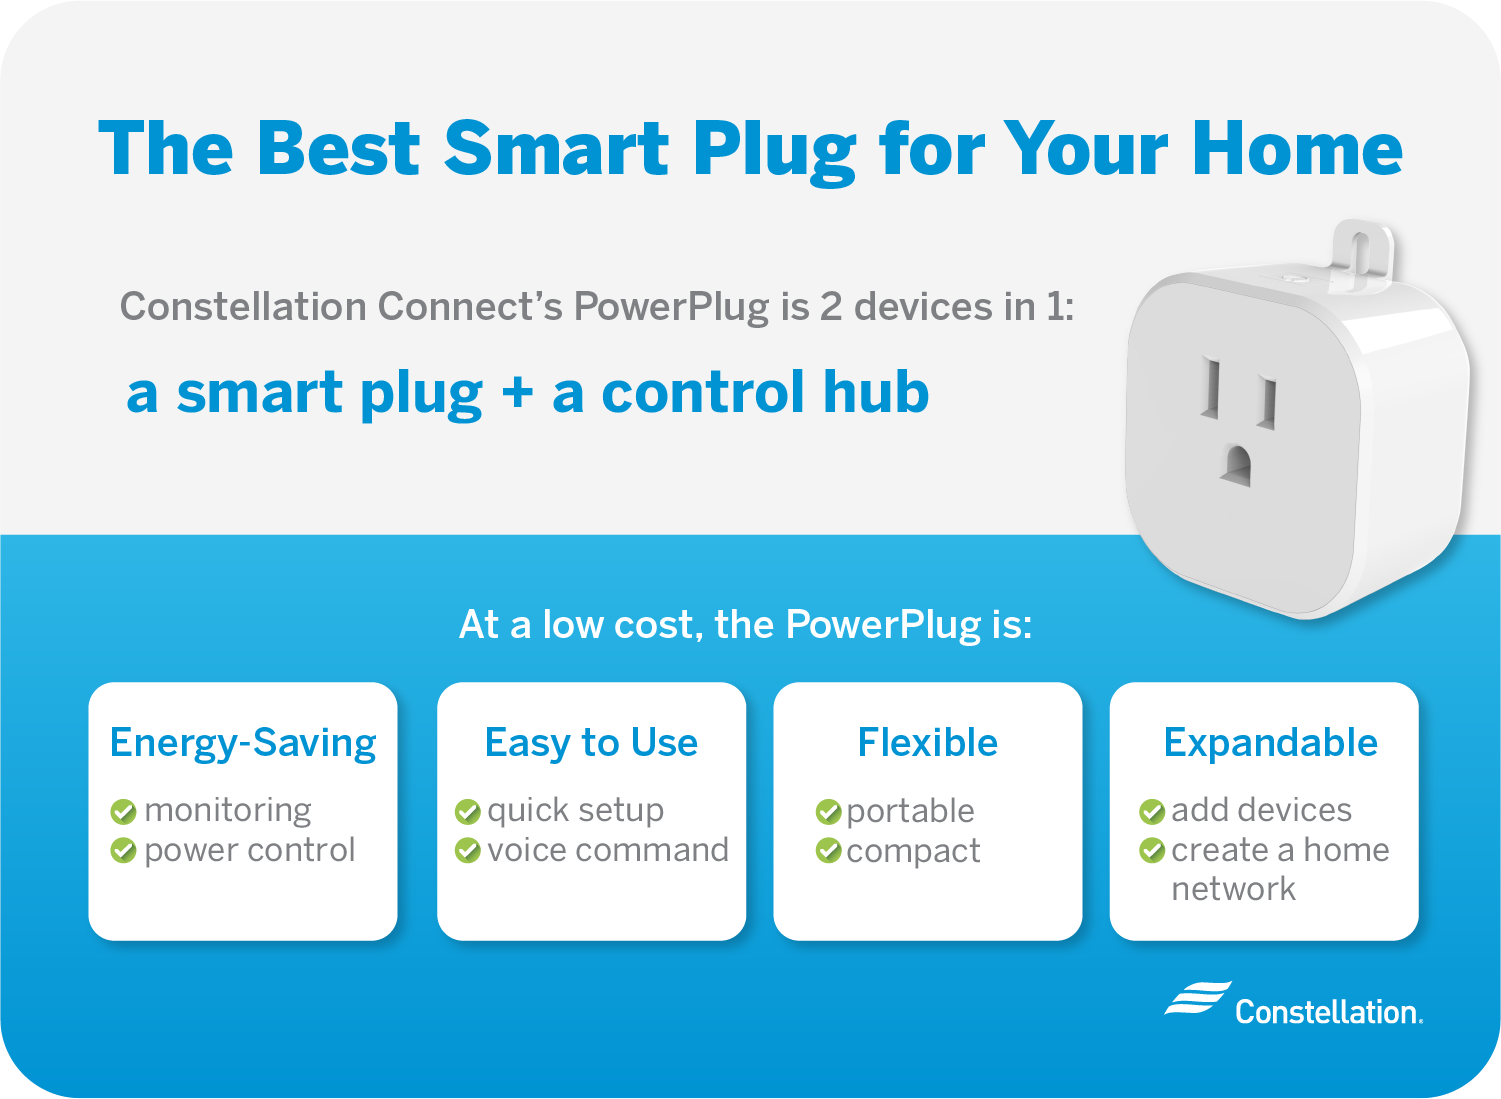 Best smart plug for your home - Constellation Connect PowerPlug.